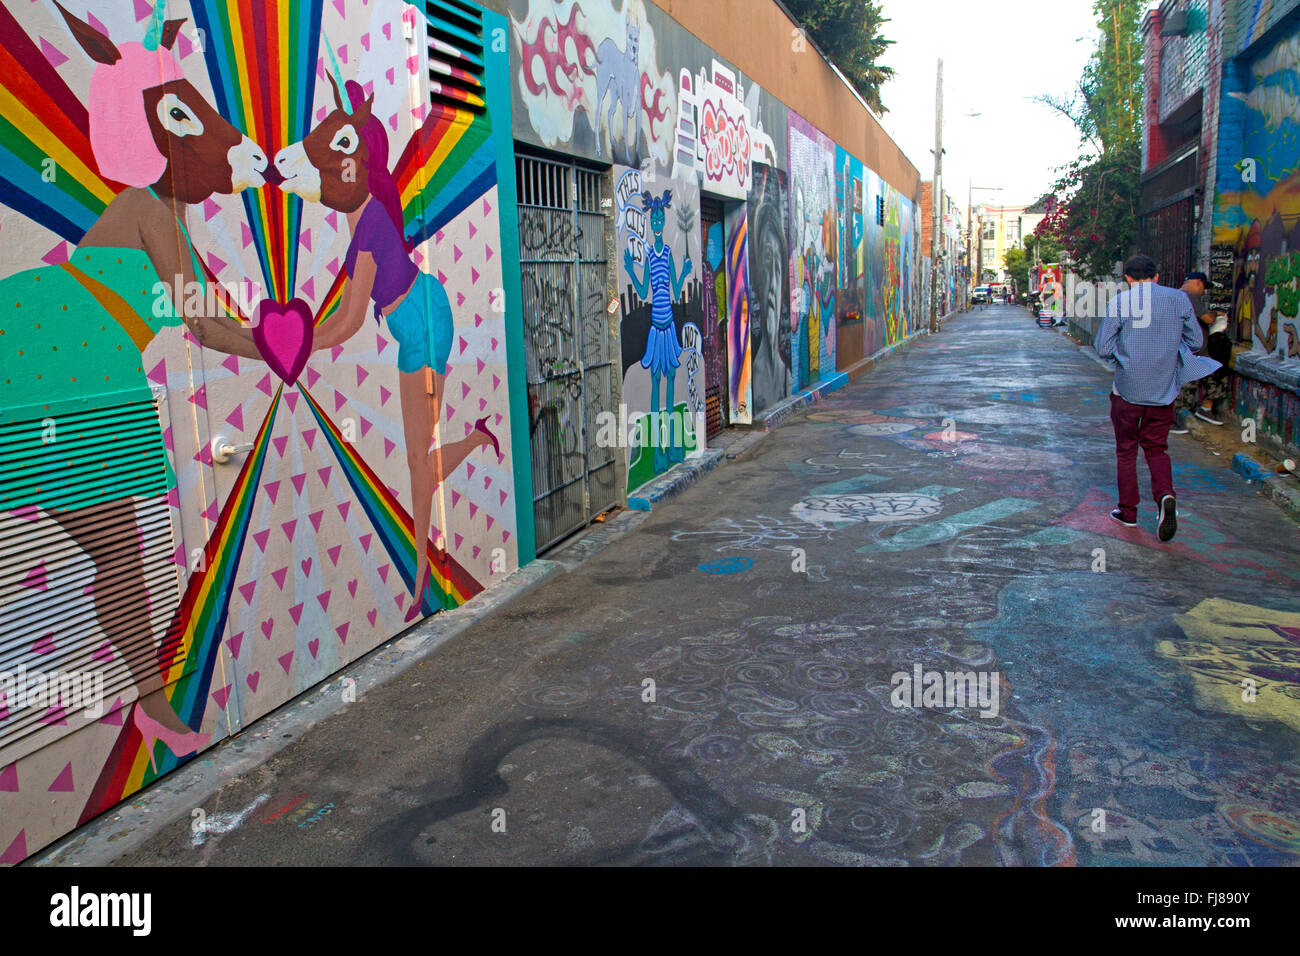 Murals in San Francisco's Mission district Stock Photo